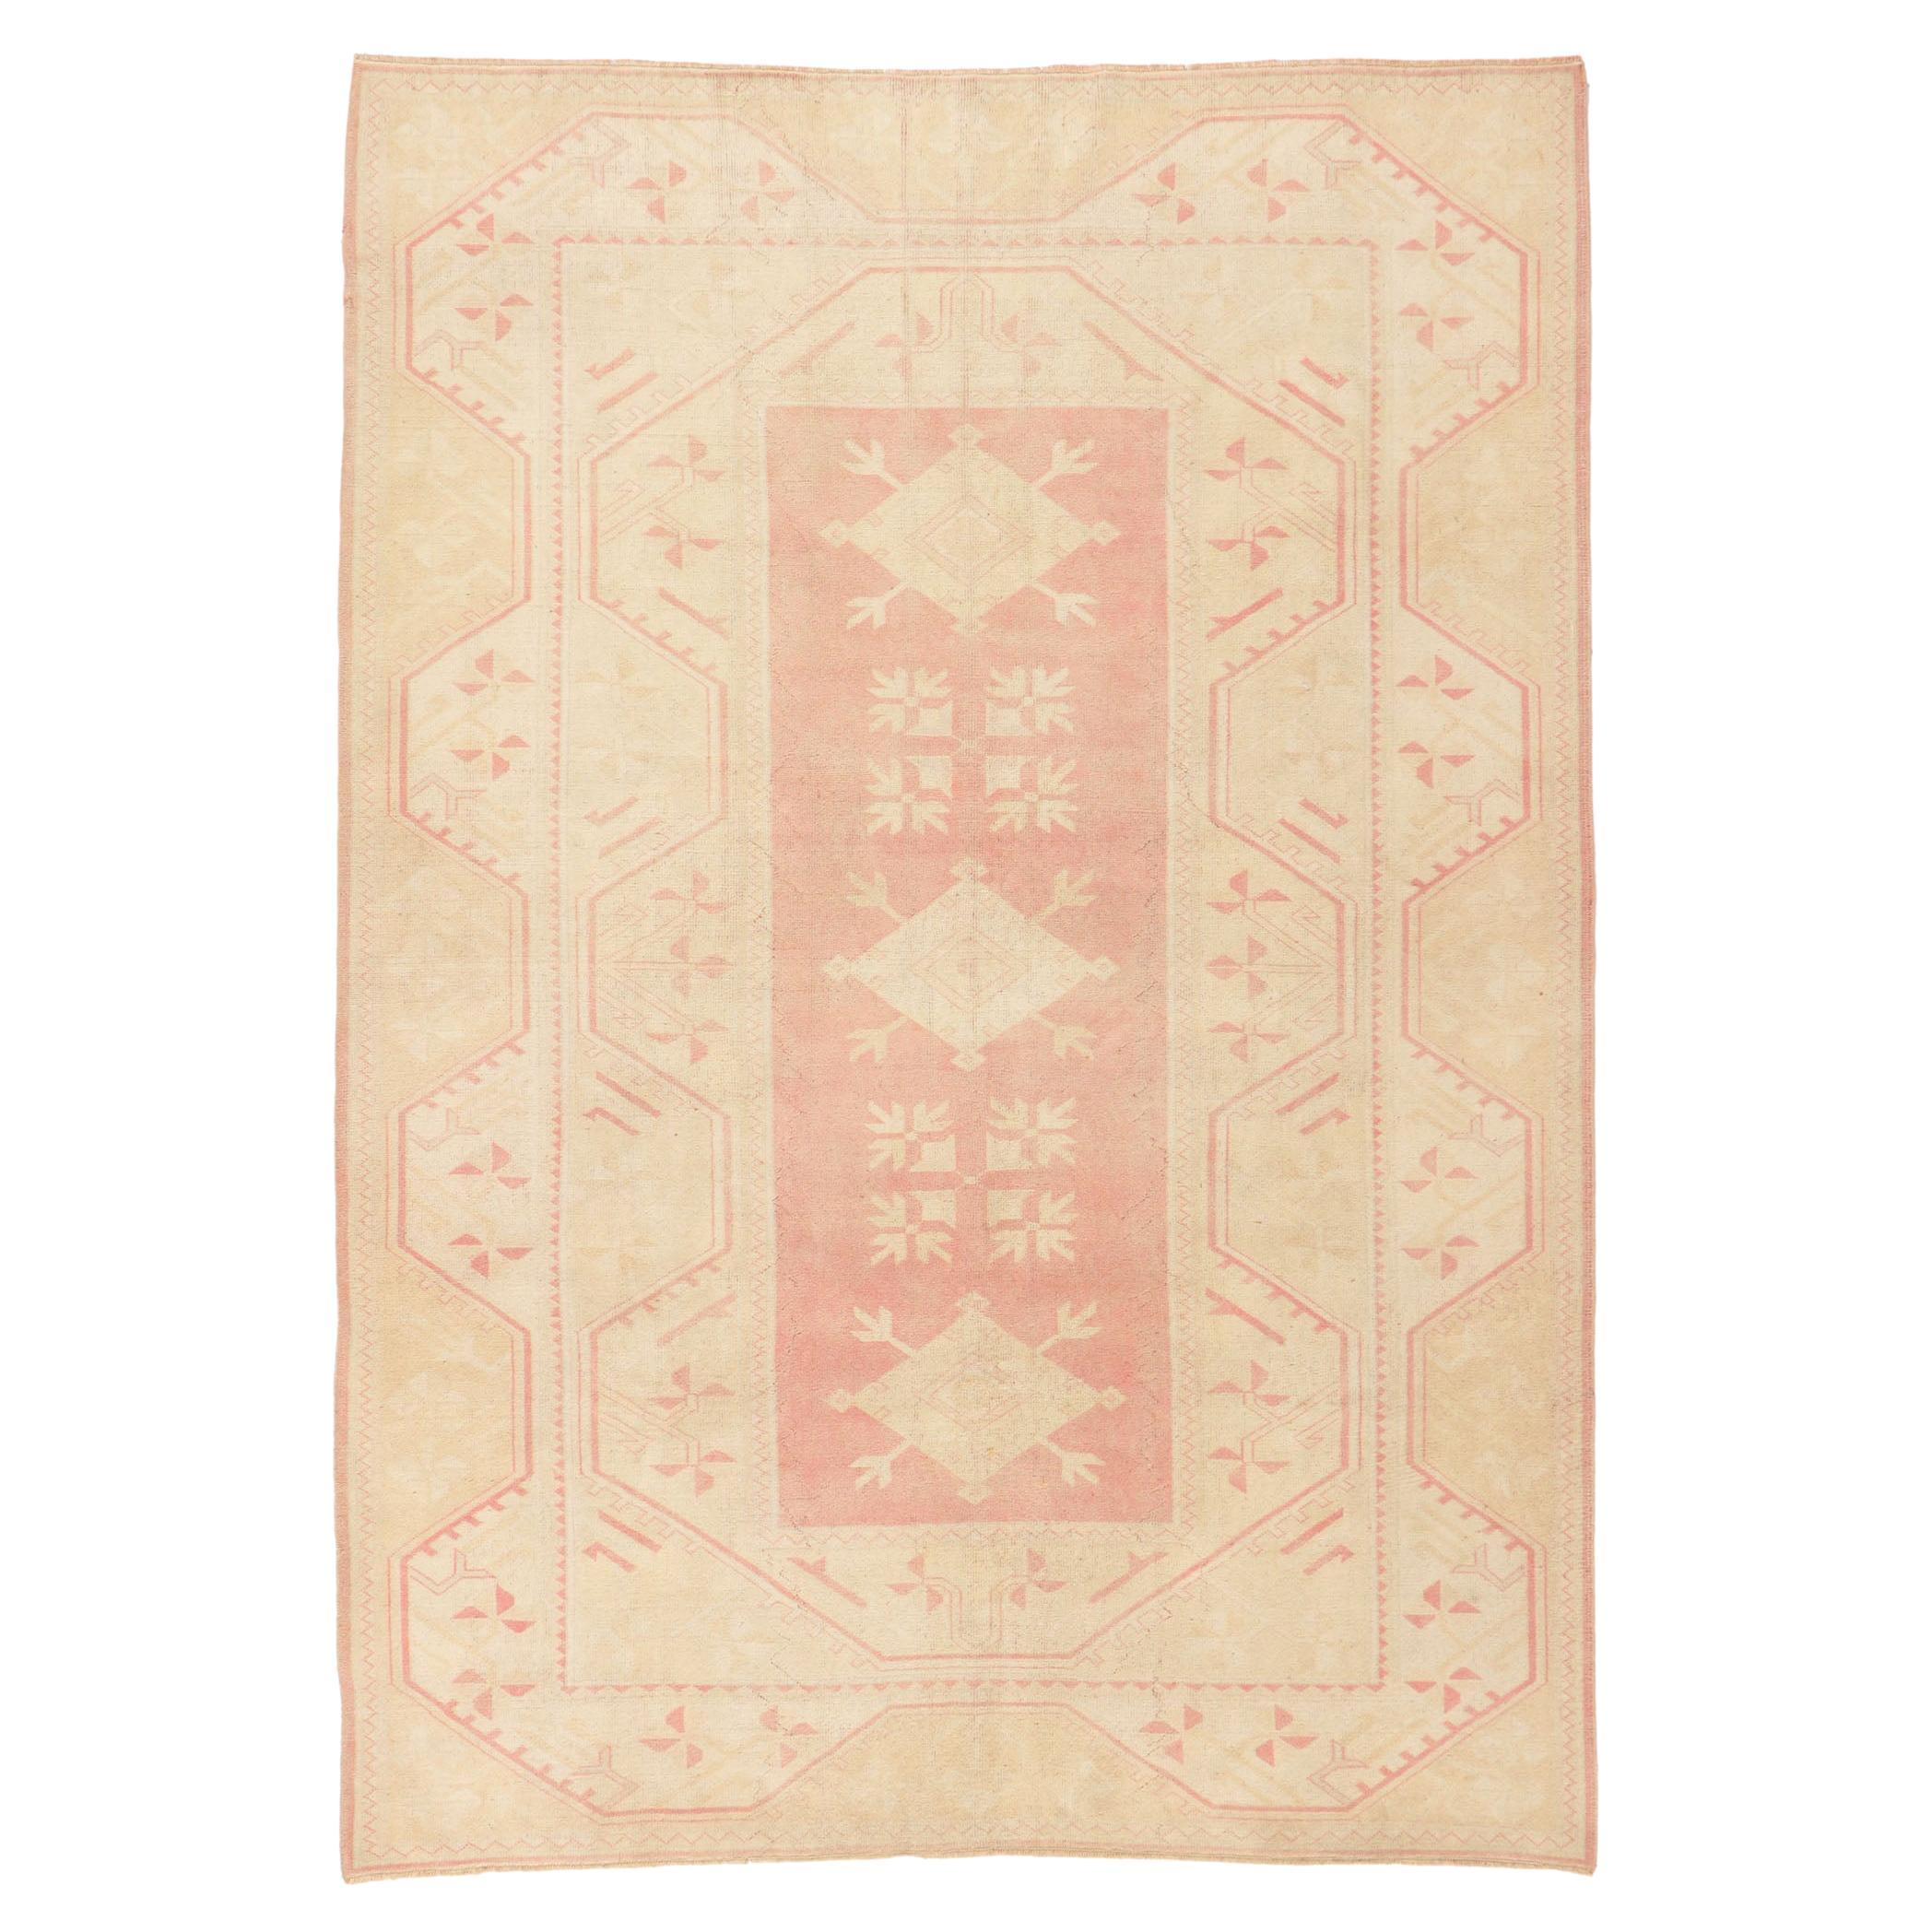 Vintage Turkish Oushak Rug, Traditional Sensibililty Meets Relaxed Refinement